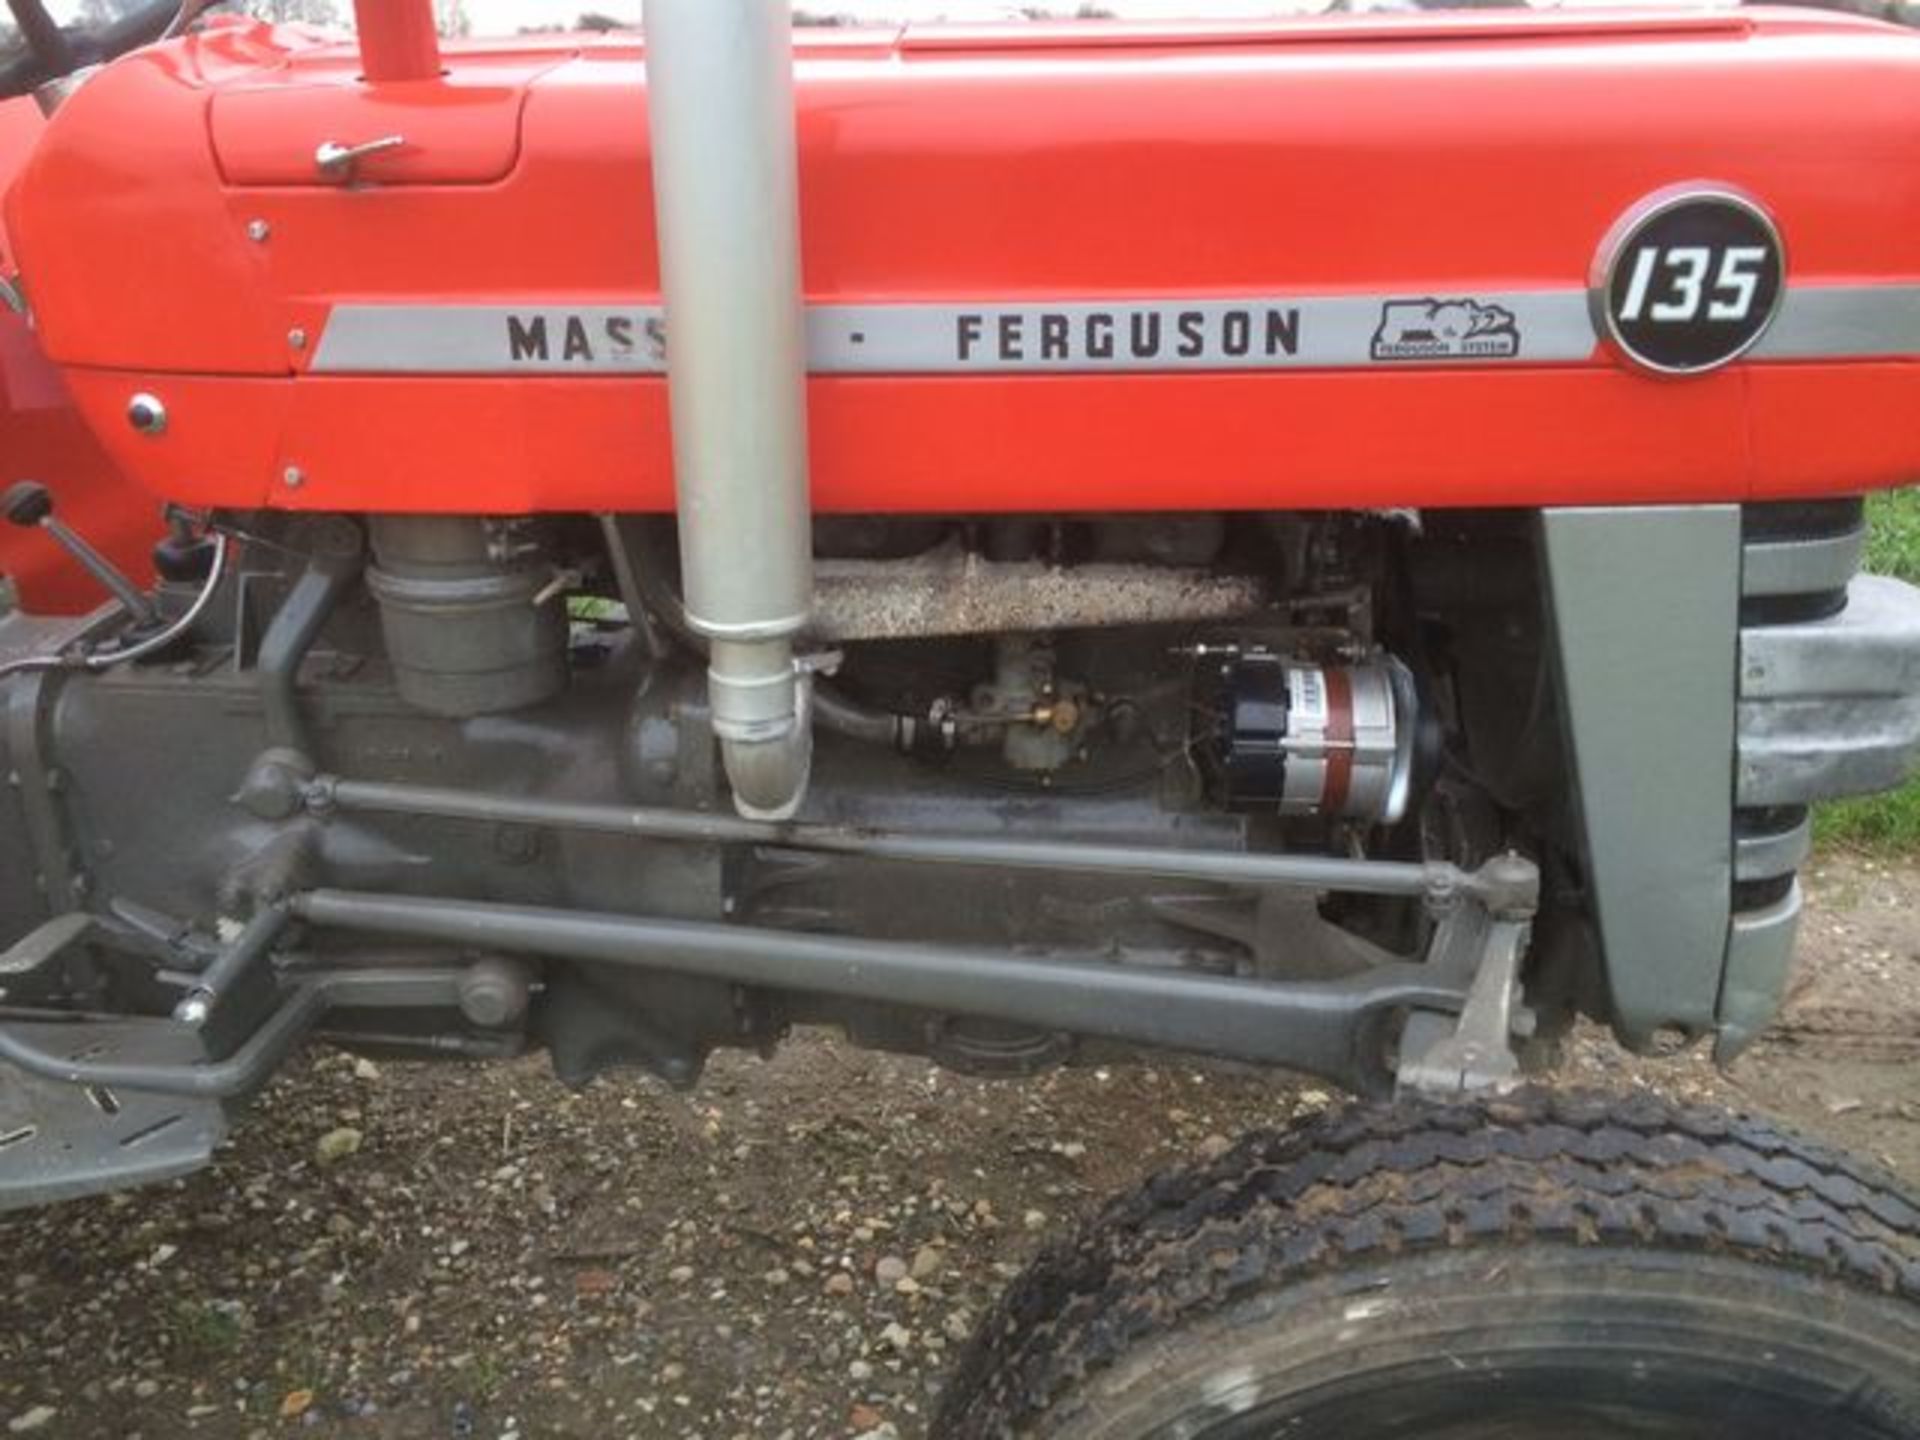 MASSEY FERGUSON Age unknown production ran between 1965 and 1975 this example shows 4107 hours - Image 7 of 10